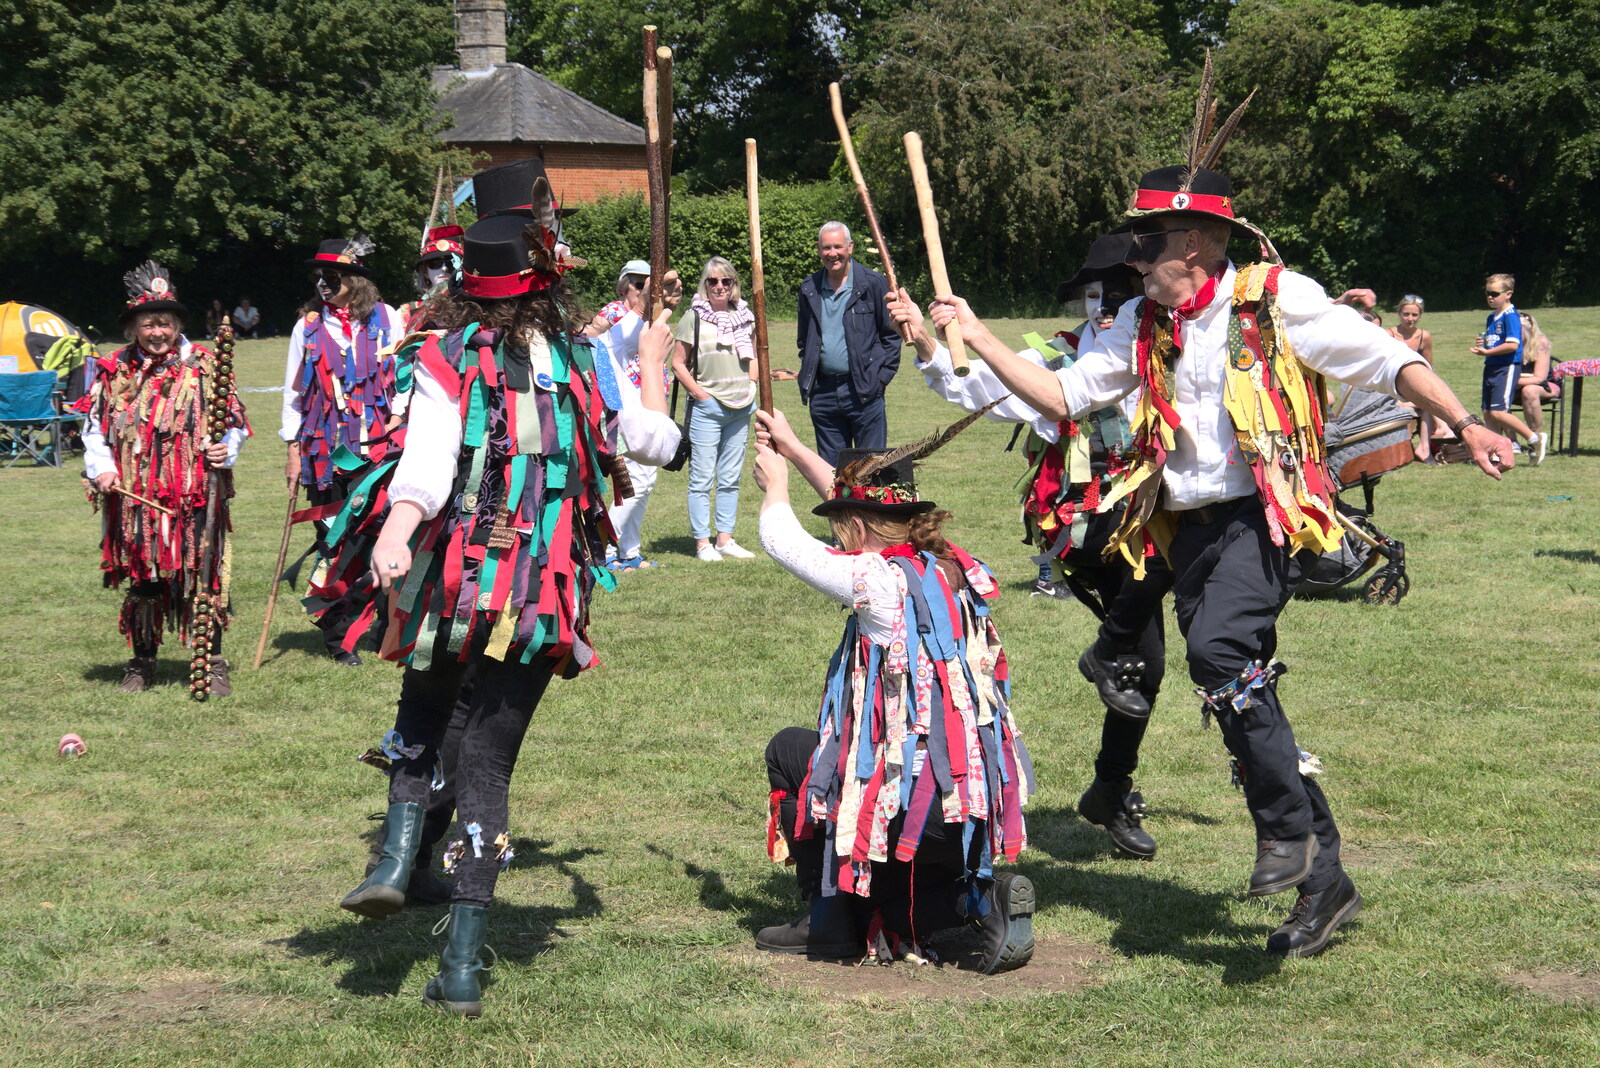 Dancing with sticks from The Gislingham Silver Band at Barningham, Suffolk - 3rd June 2022